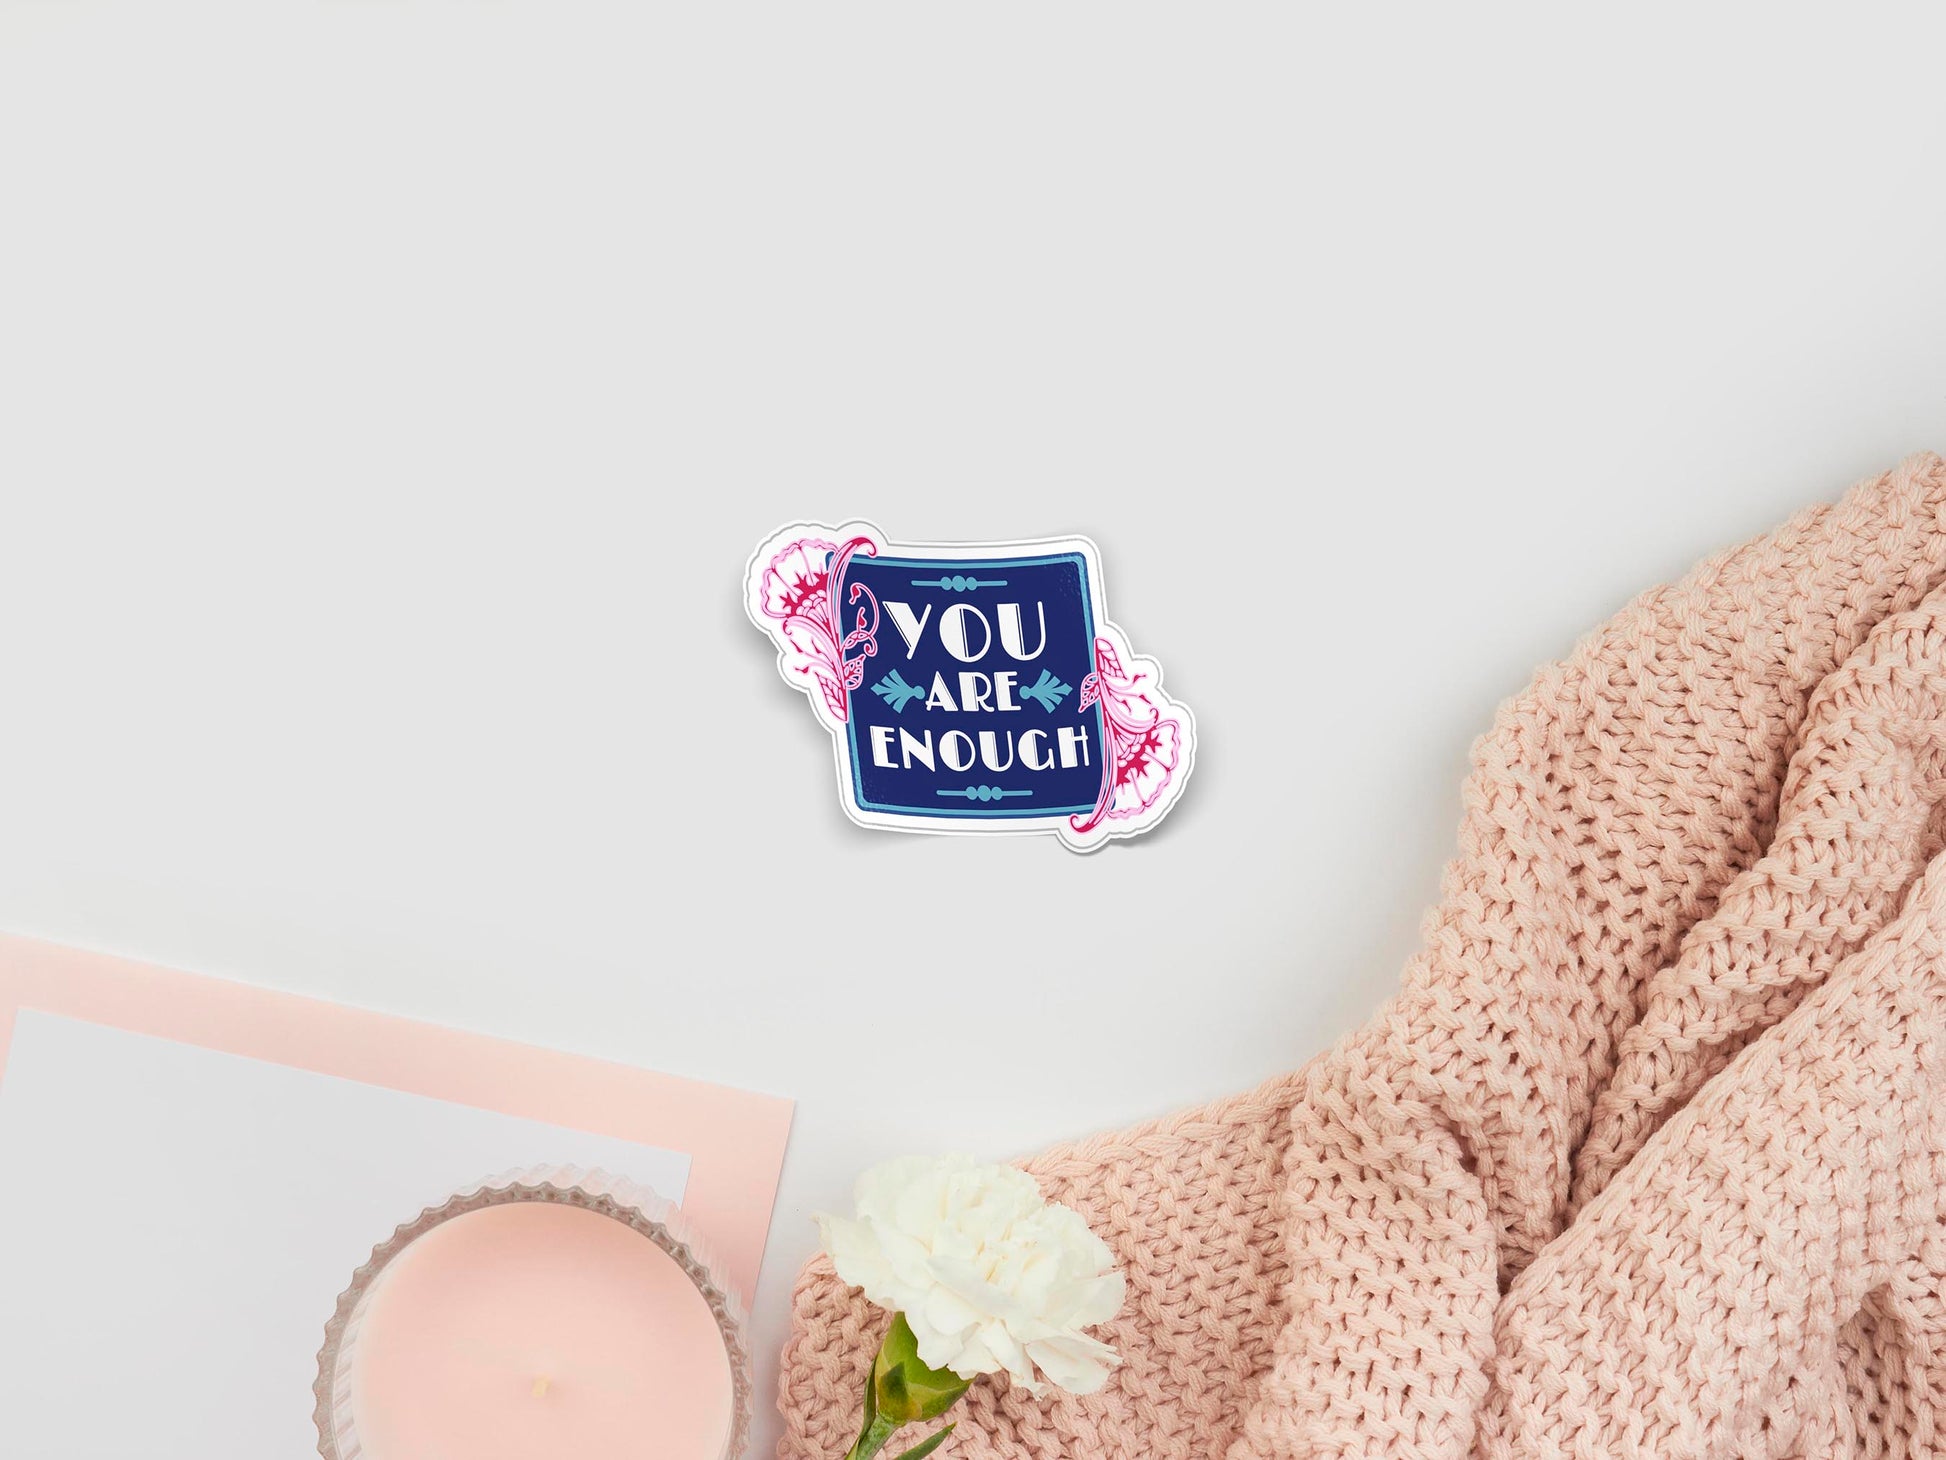 Large sticker of digital illustration cartoon of a blue square frame with pink floral accents and the text You Are Enough written in white font placed in the centre of the design